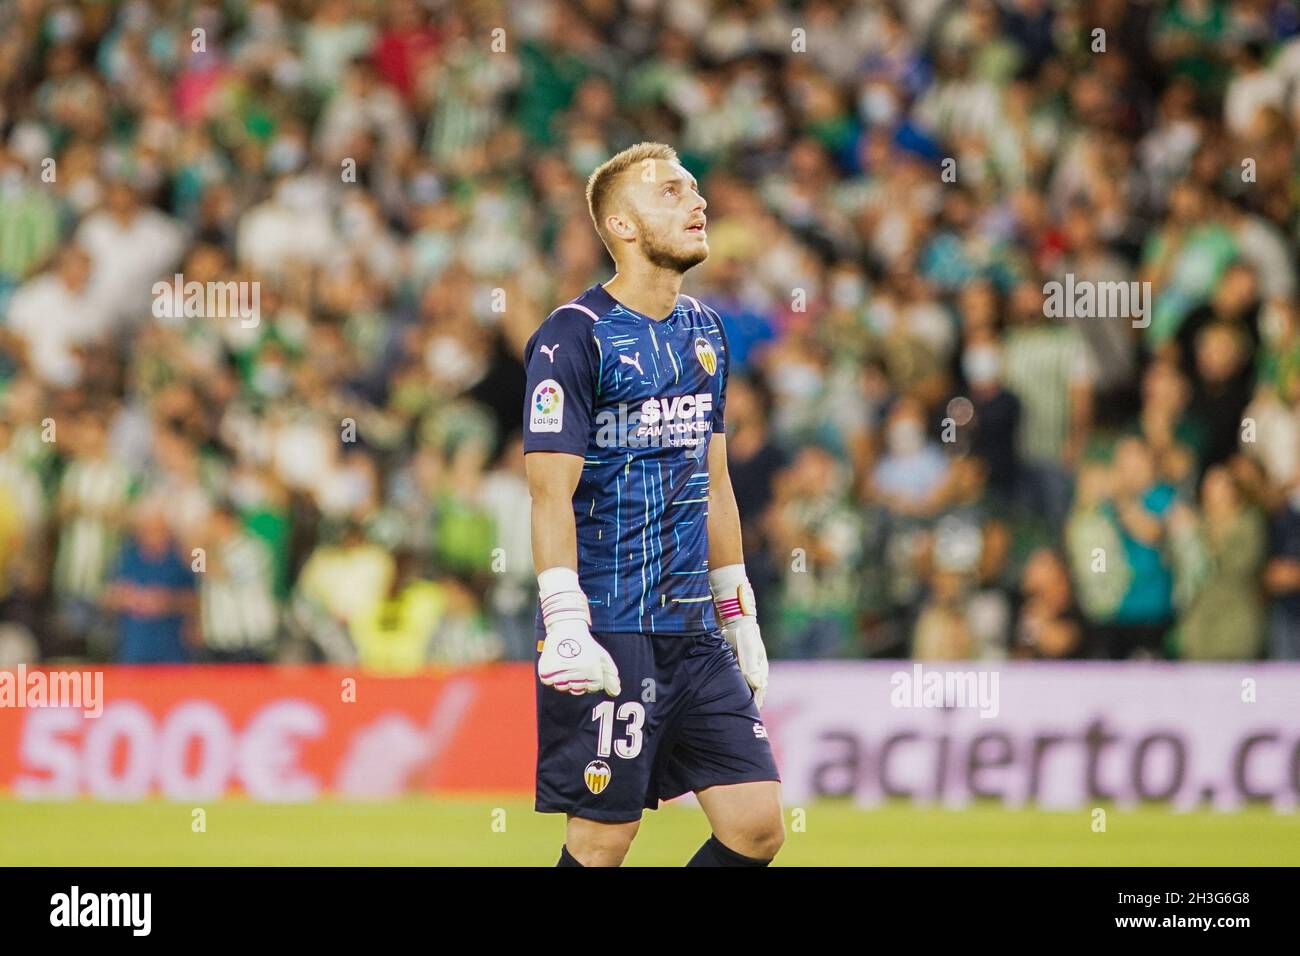 Seville, Spain. 27th Oct, 2021. Jasper Cillessen in action during the La Liga Santander match between Real Betis and Valencia CF at Benito Villamarin Stadium. (Final Score: Real Betis 4:1 Valencia CF). (Photo by Francis Gonzalez/SOPA Images/Sipa USA) Credit: Sipa USA/Alamy Live News Stock Photo